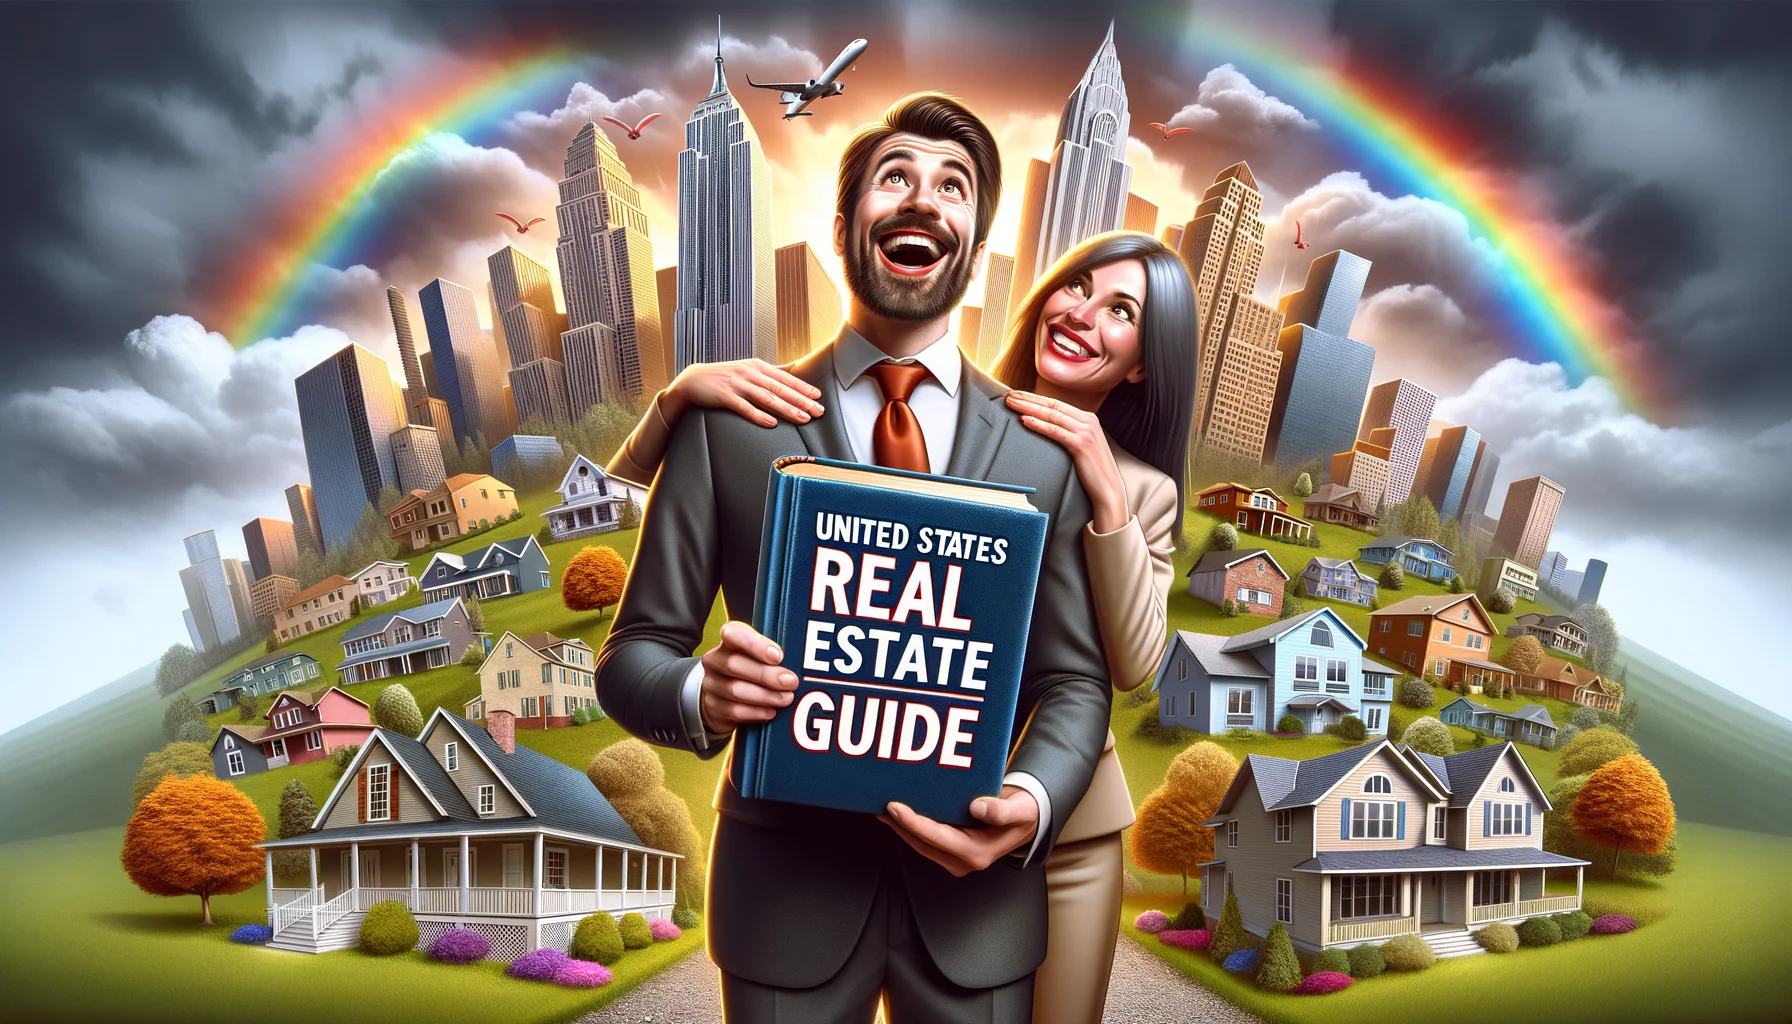 Create a humorous, realistic image capturing the ideal scenario of real estate in the United States. It should show a diverse selection of properties from urban skyscrapers to suburban houses and rustic countryside homes. Include a visual representation of a 'guide,' perhaps as a comically oversized manual with the title 'United States Real Estate Guide', held by a cheerful Caucasian male real estate agent and a joyful Hispanic female home buyer. They should look ecstatic, emphasizing the humor, perhaps underscored by a rainbow in the background signifying the perfection of their dream scenario.